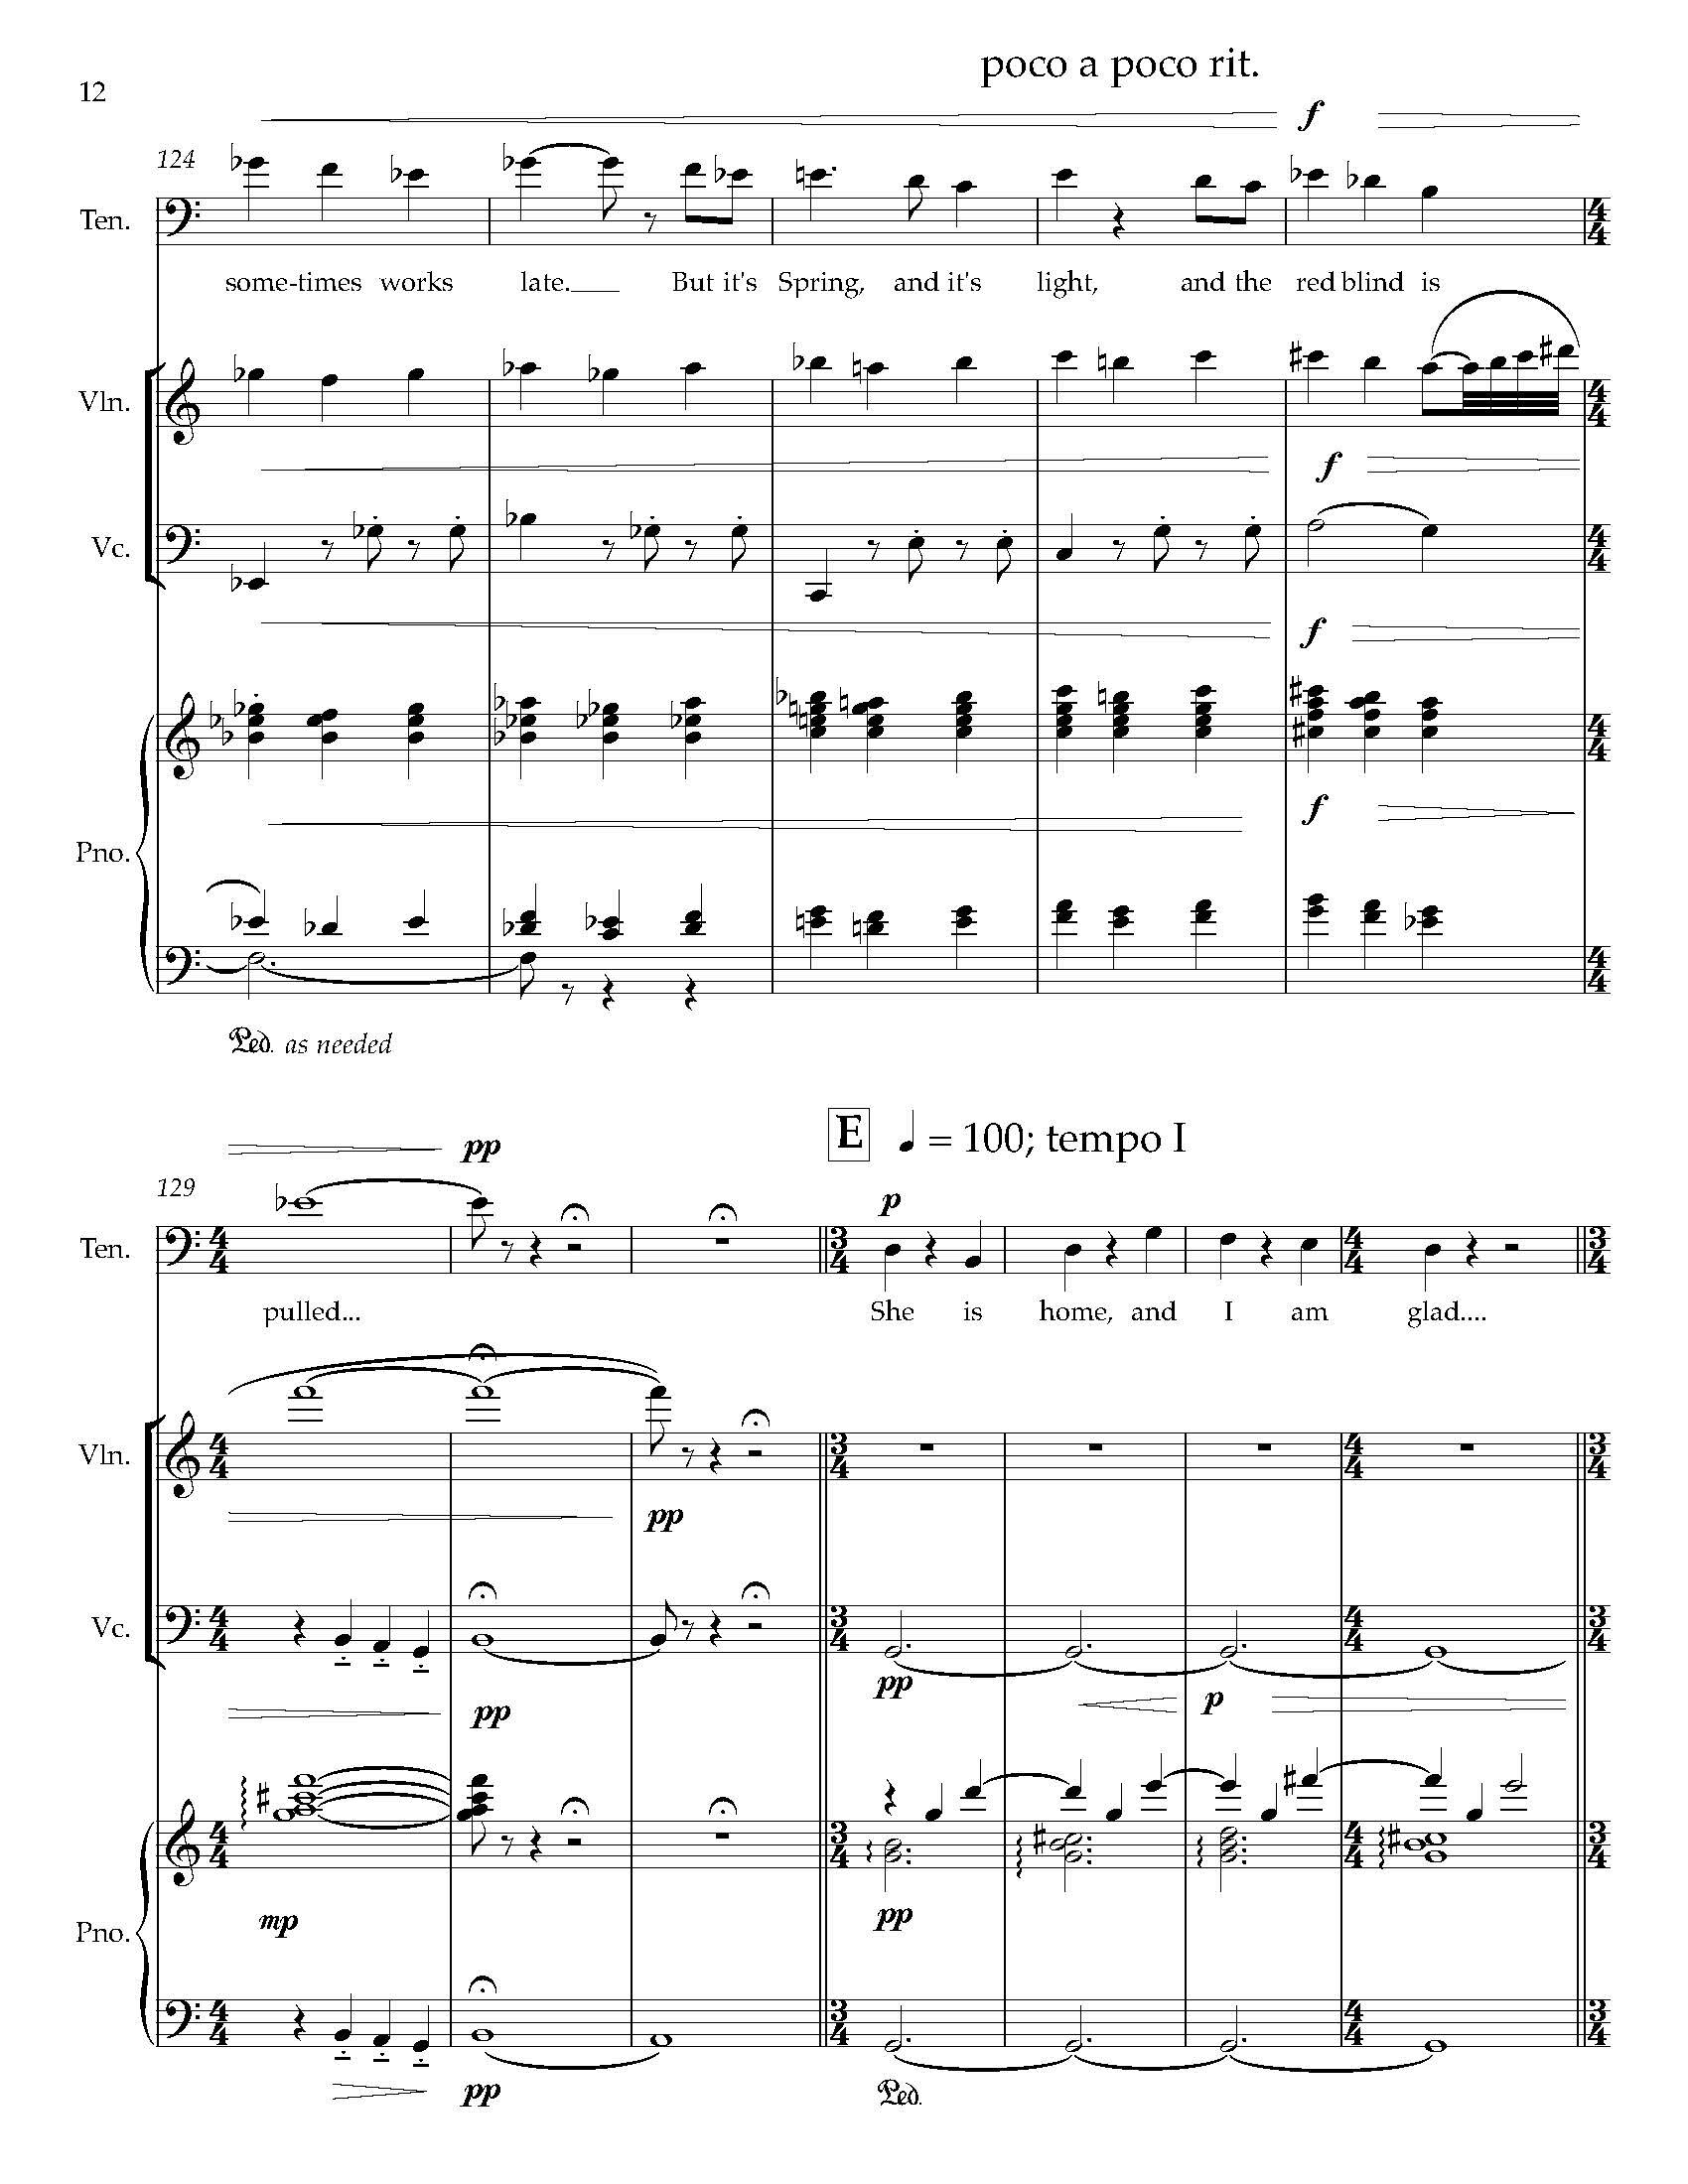 Gursky Songs - Complete Score_Page_20.jpg